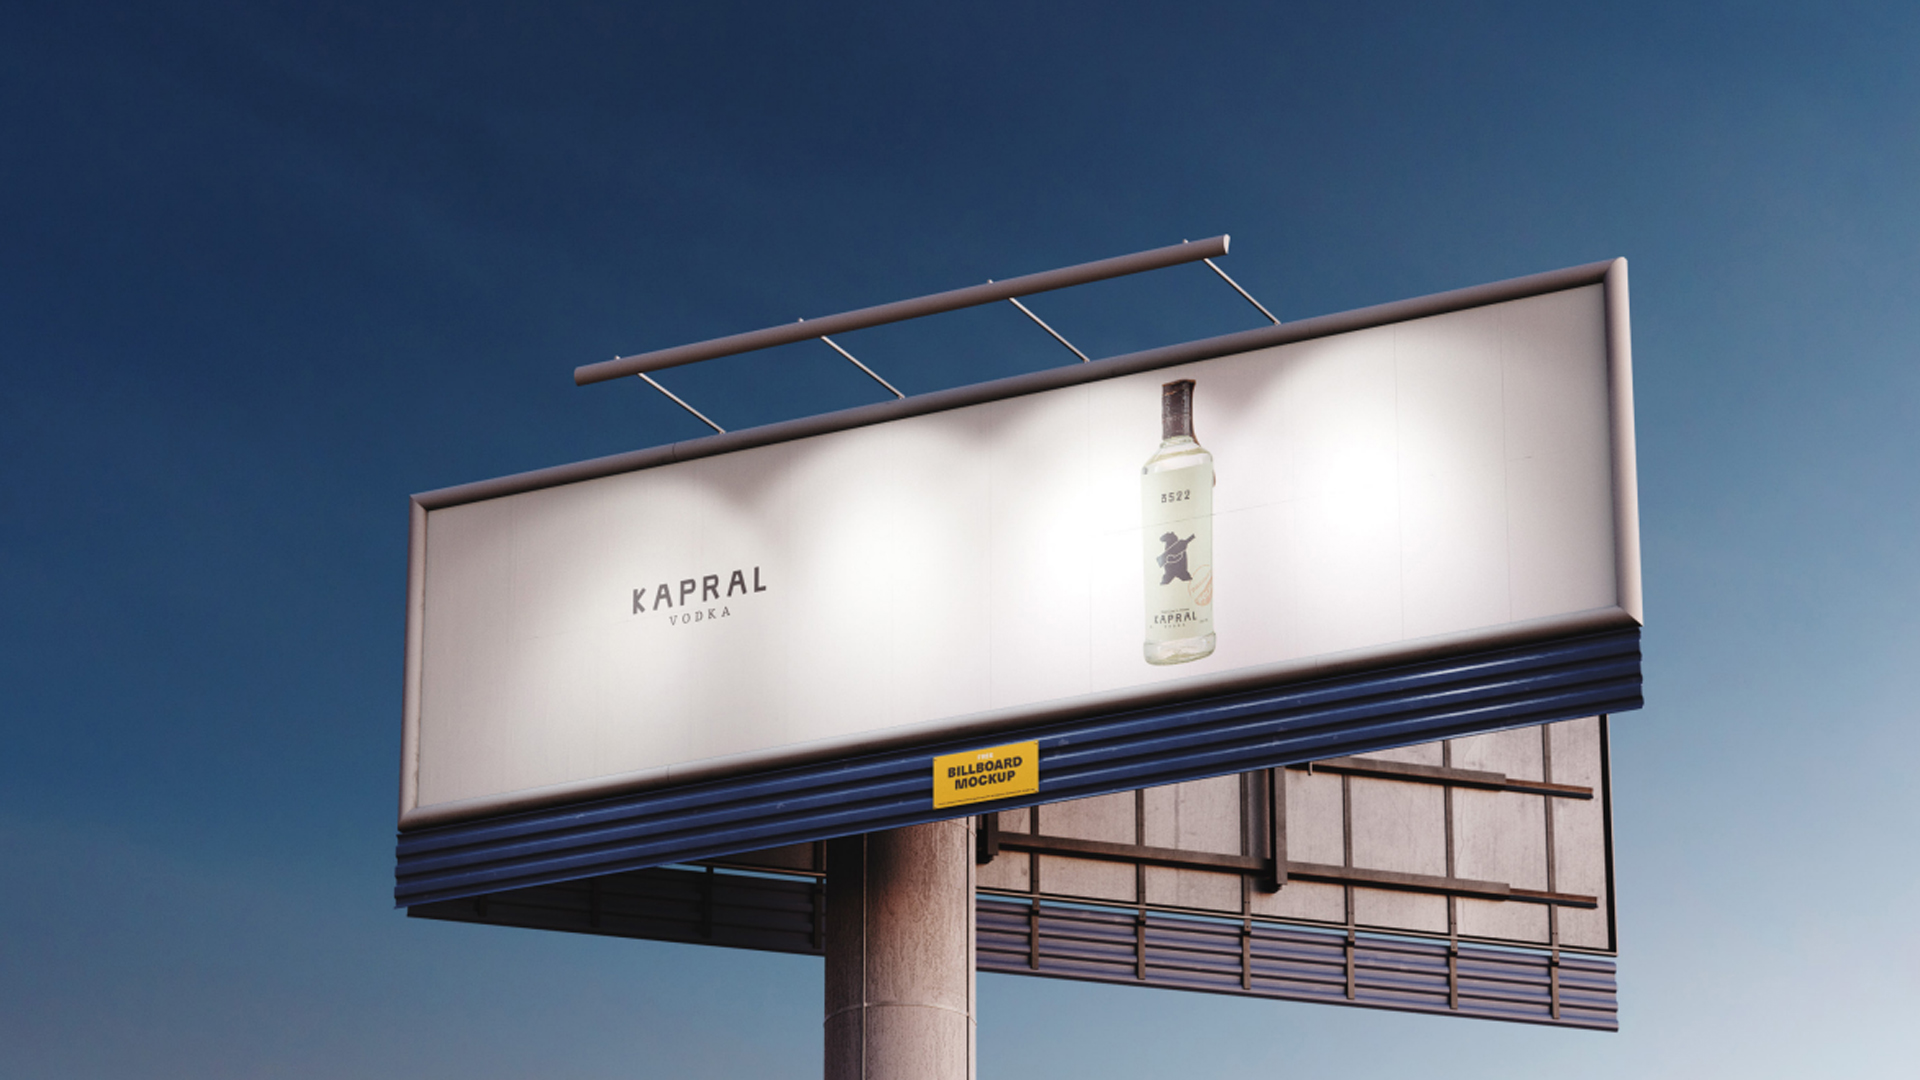 This billboard is simplistic and straight to the point with only the bottle on the image.